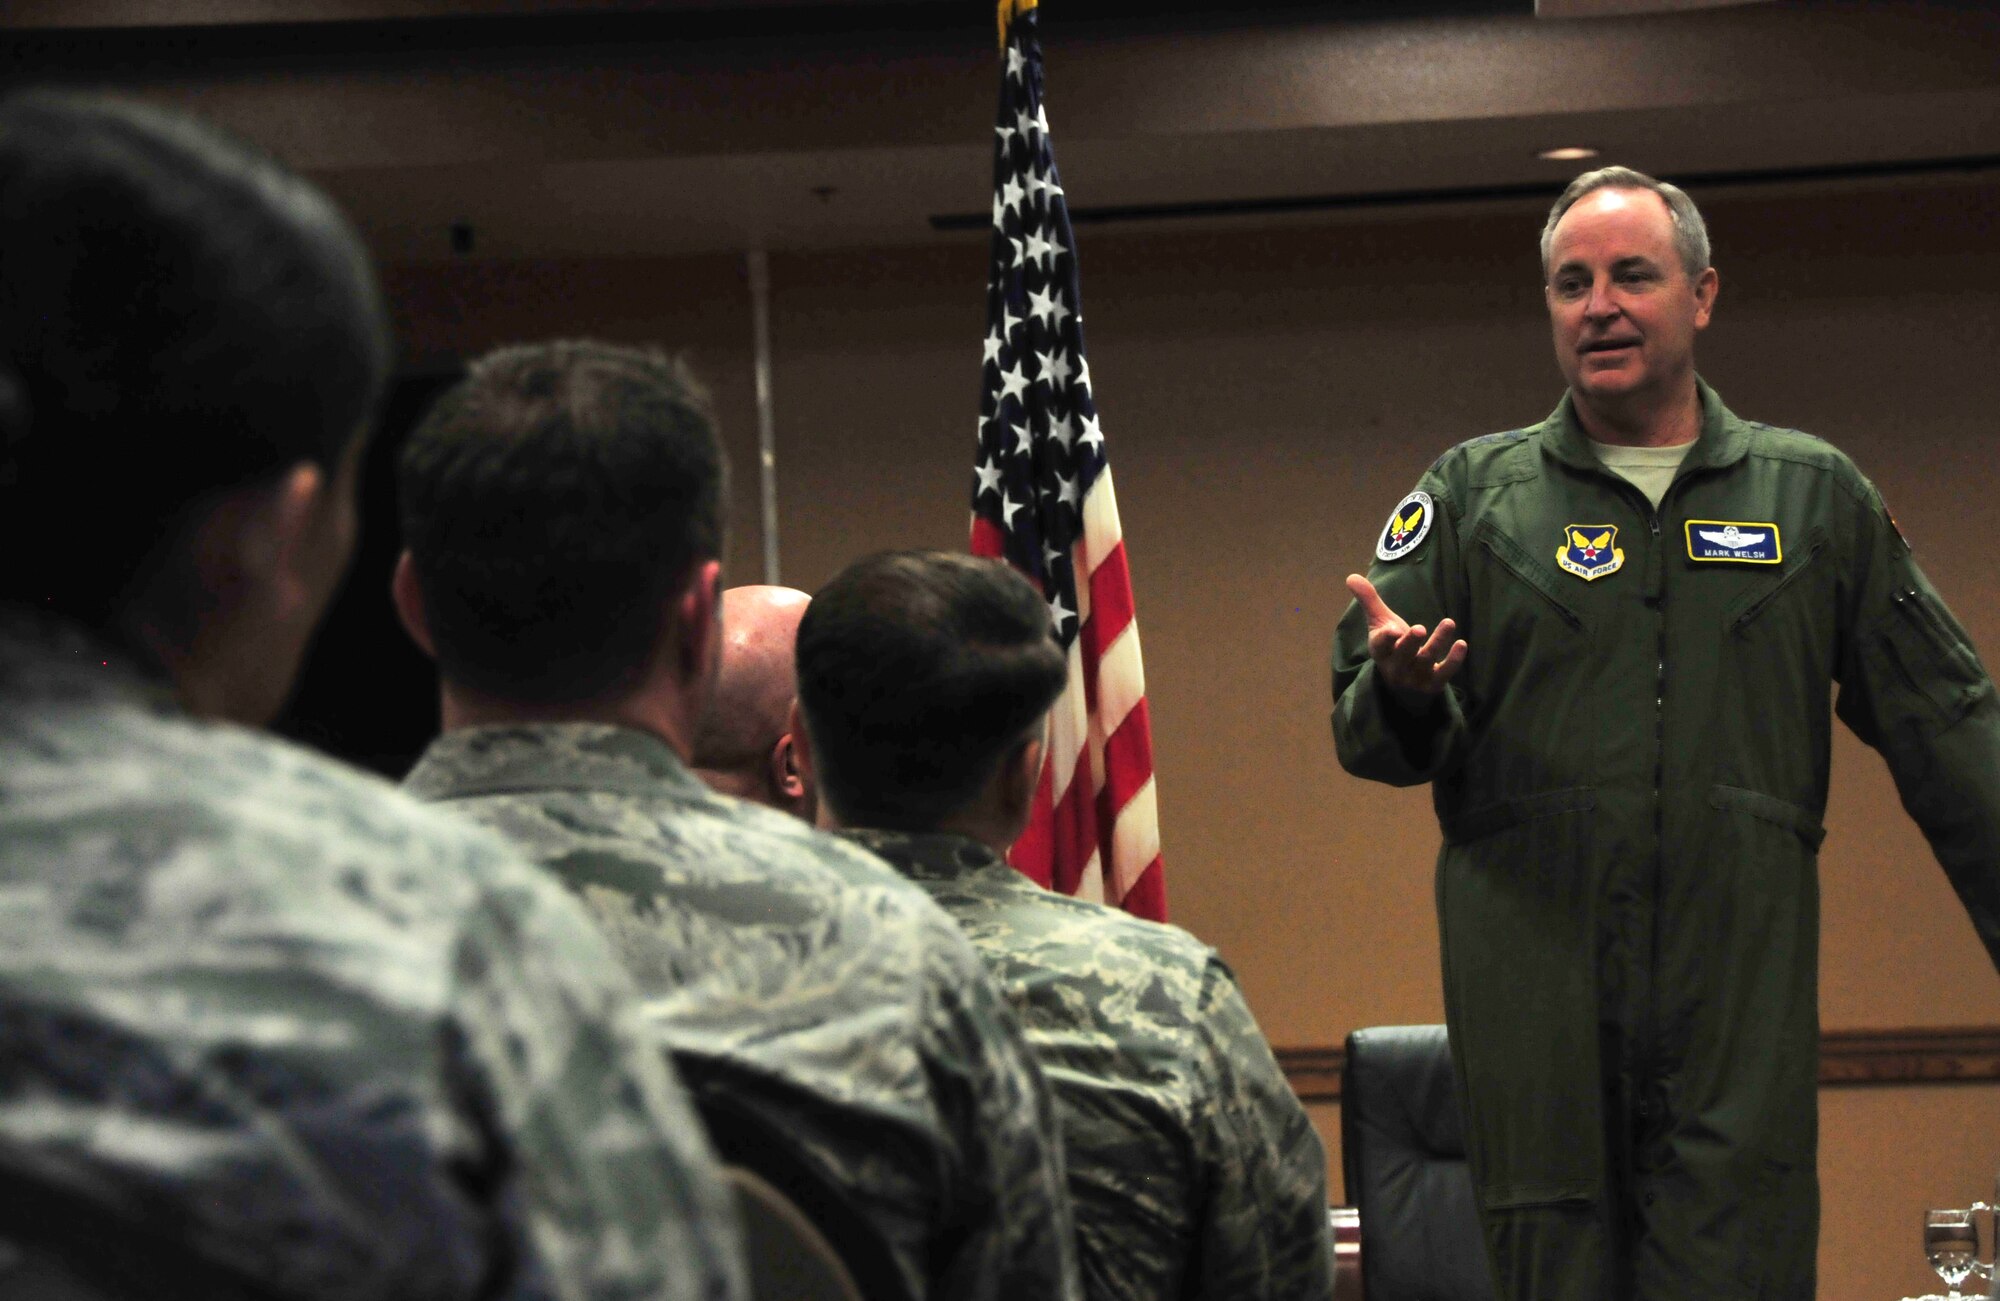 Air Force Chief of Staff Gen. Mark A. Welsh III addresses Airmen of the 161st Air Refueling Wing, during a town hall meeting March 22, 2015, at Phoenix Sky Harbor Air National Guard Base, Ariz. During the visit, Welsh interacted with Airmen and their spouses at an officer’s call and mission brief. The chief of staff got a first-hand look at the KC-135 Stratotanker unit and the Airmen who make the refueling mission a success. (U.S. Air National Guard photo/Tech. Sgt. Courtney Enos) 